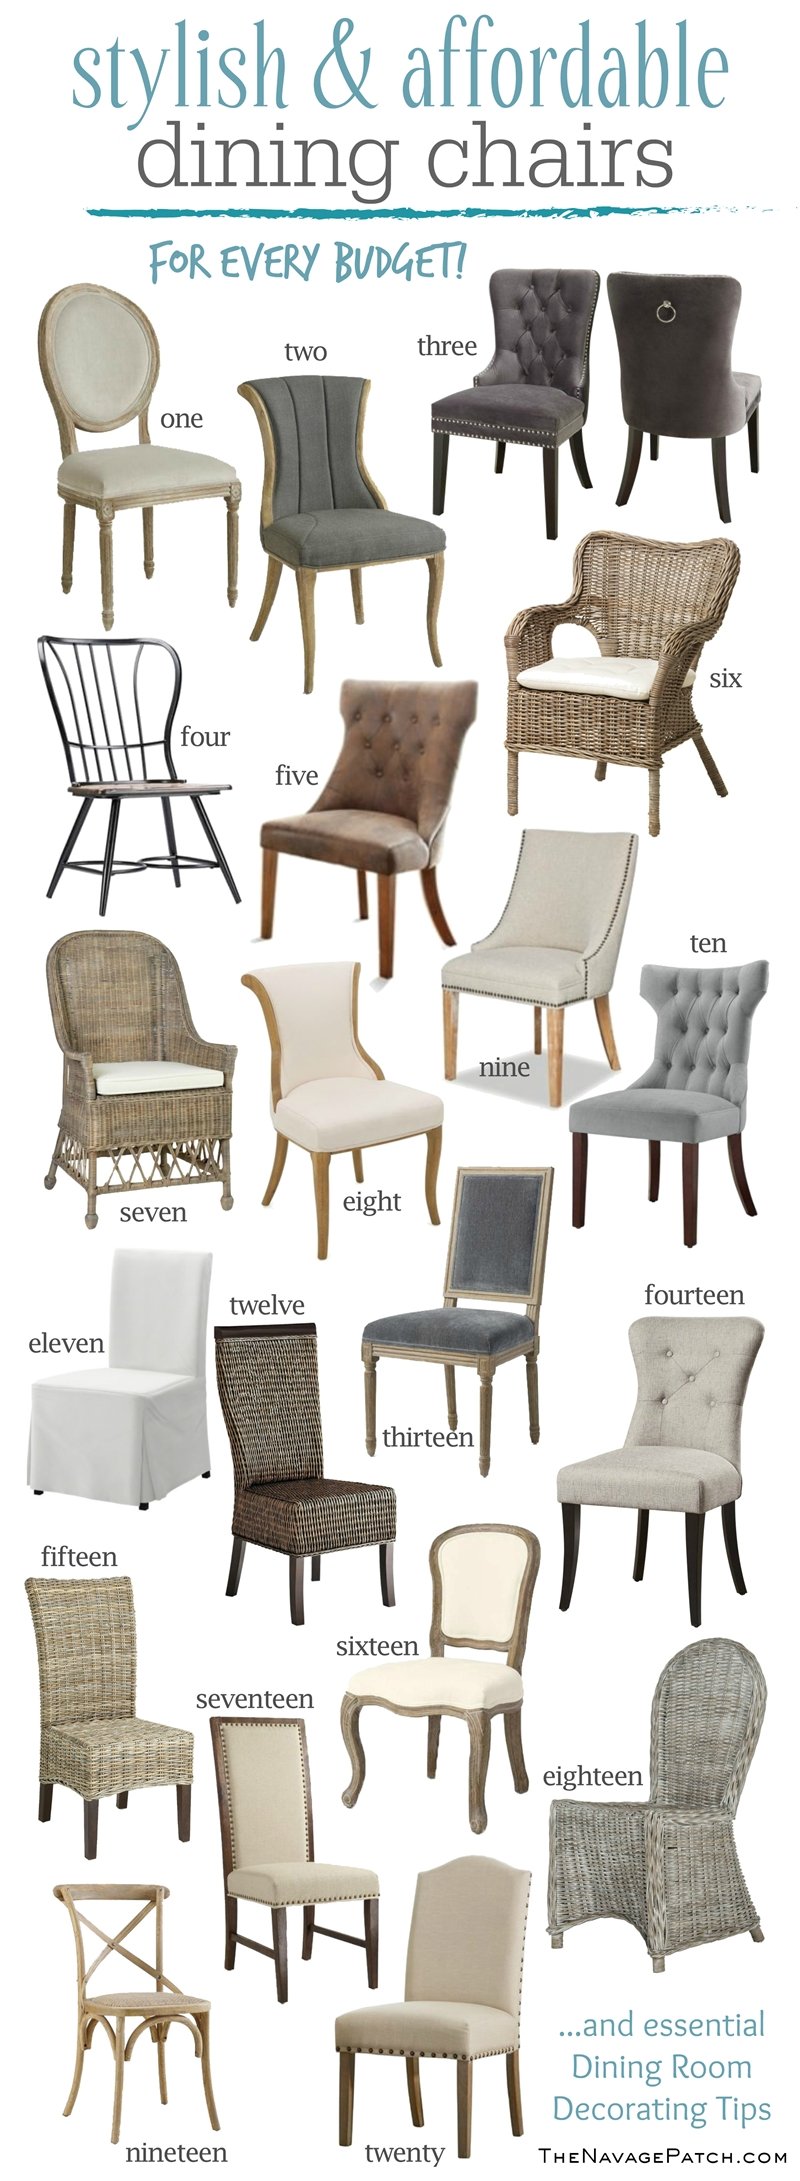 Inexpensive Dining Chairs and Dining Room Decor Tips | How to decorate a dining room | Essential dining room decorating tips | How to give a high-end look to your dining room on a budget | Shopping guide for stylish and affordable dining room chairs | Dining room carpet shopping guide | Budget friendly dining chairs | Best places to buy dining chairs | TheNavagePatch.com